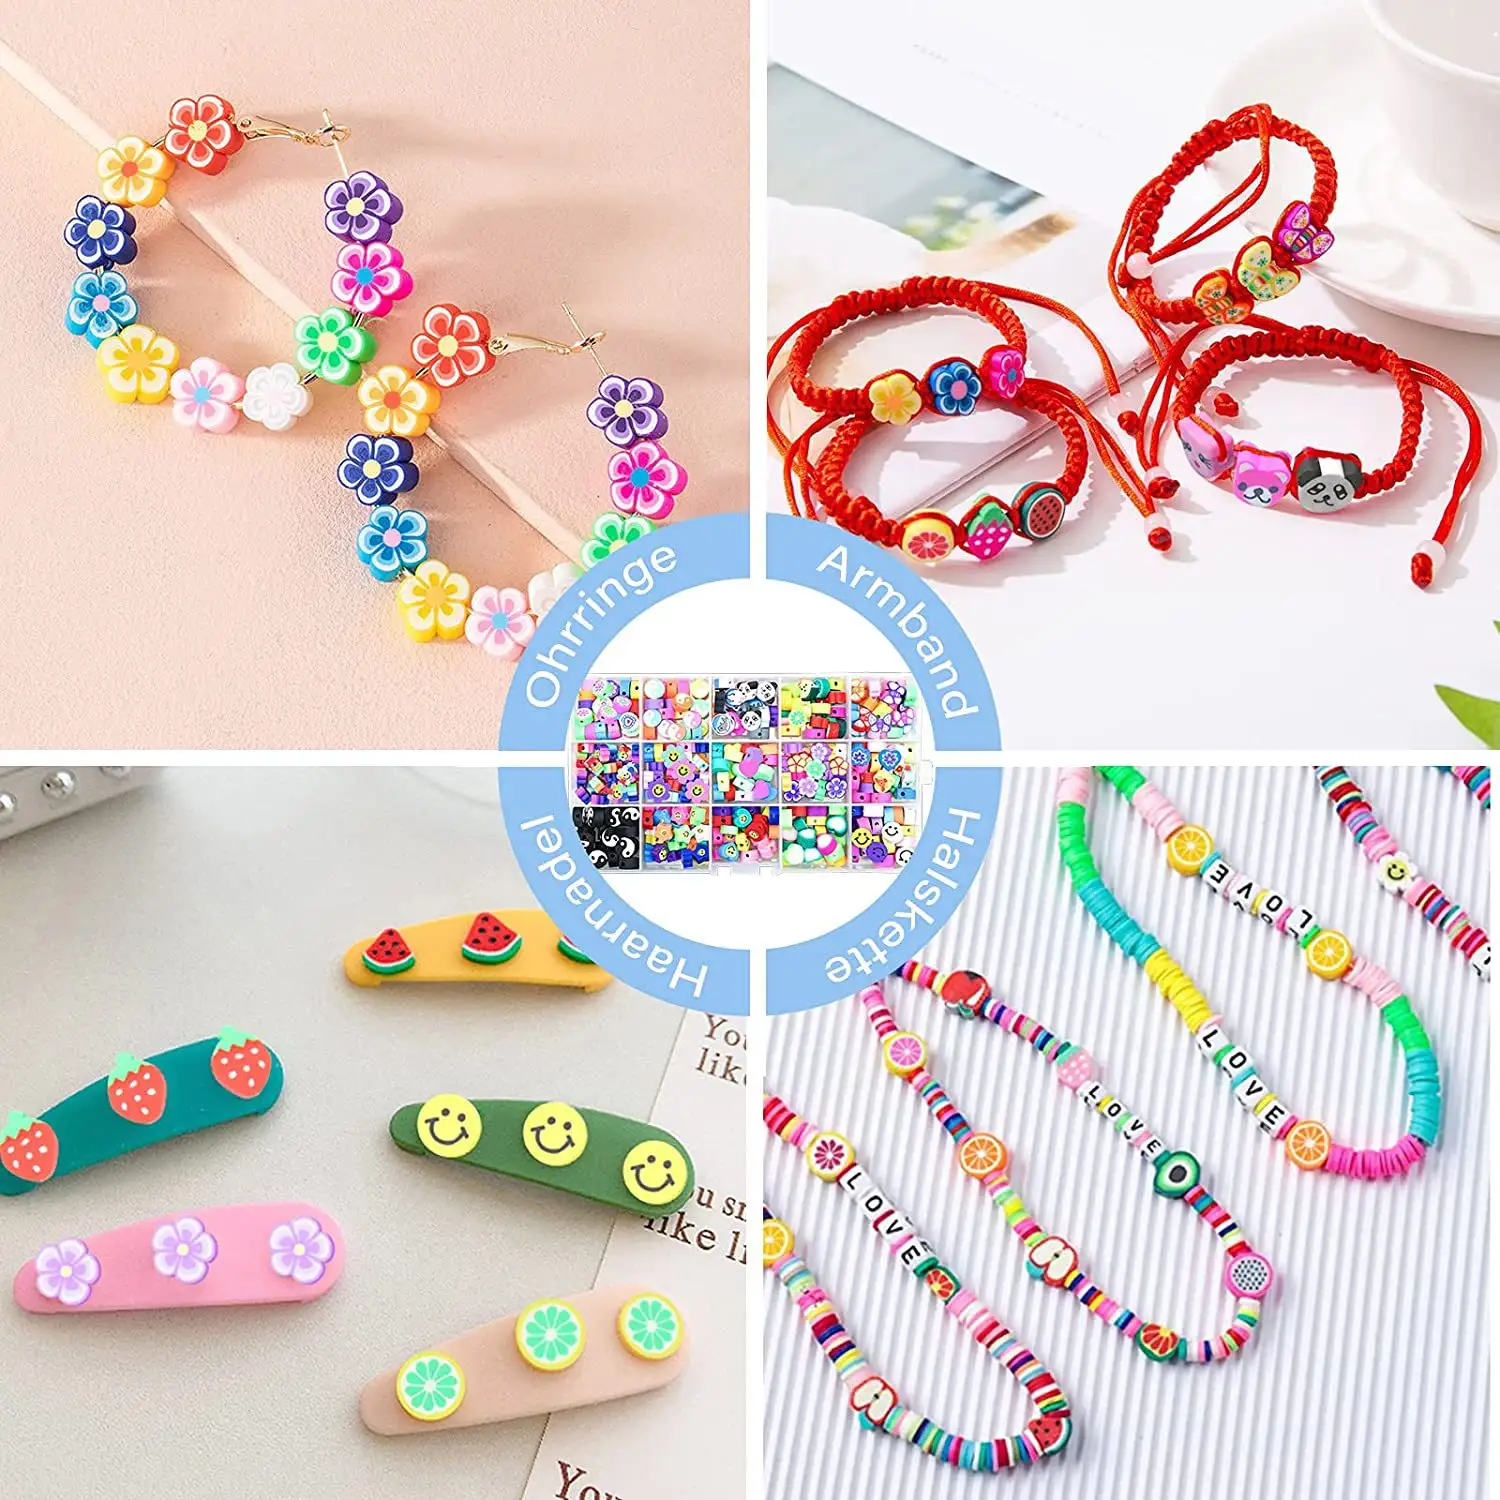 480 Pcs DIY Cute Clay Bead Fruit Flower Smile Face Beads Polymer Soft Clay Kit For Bracelet Making